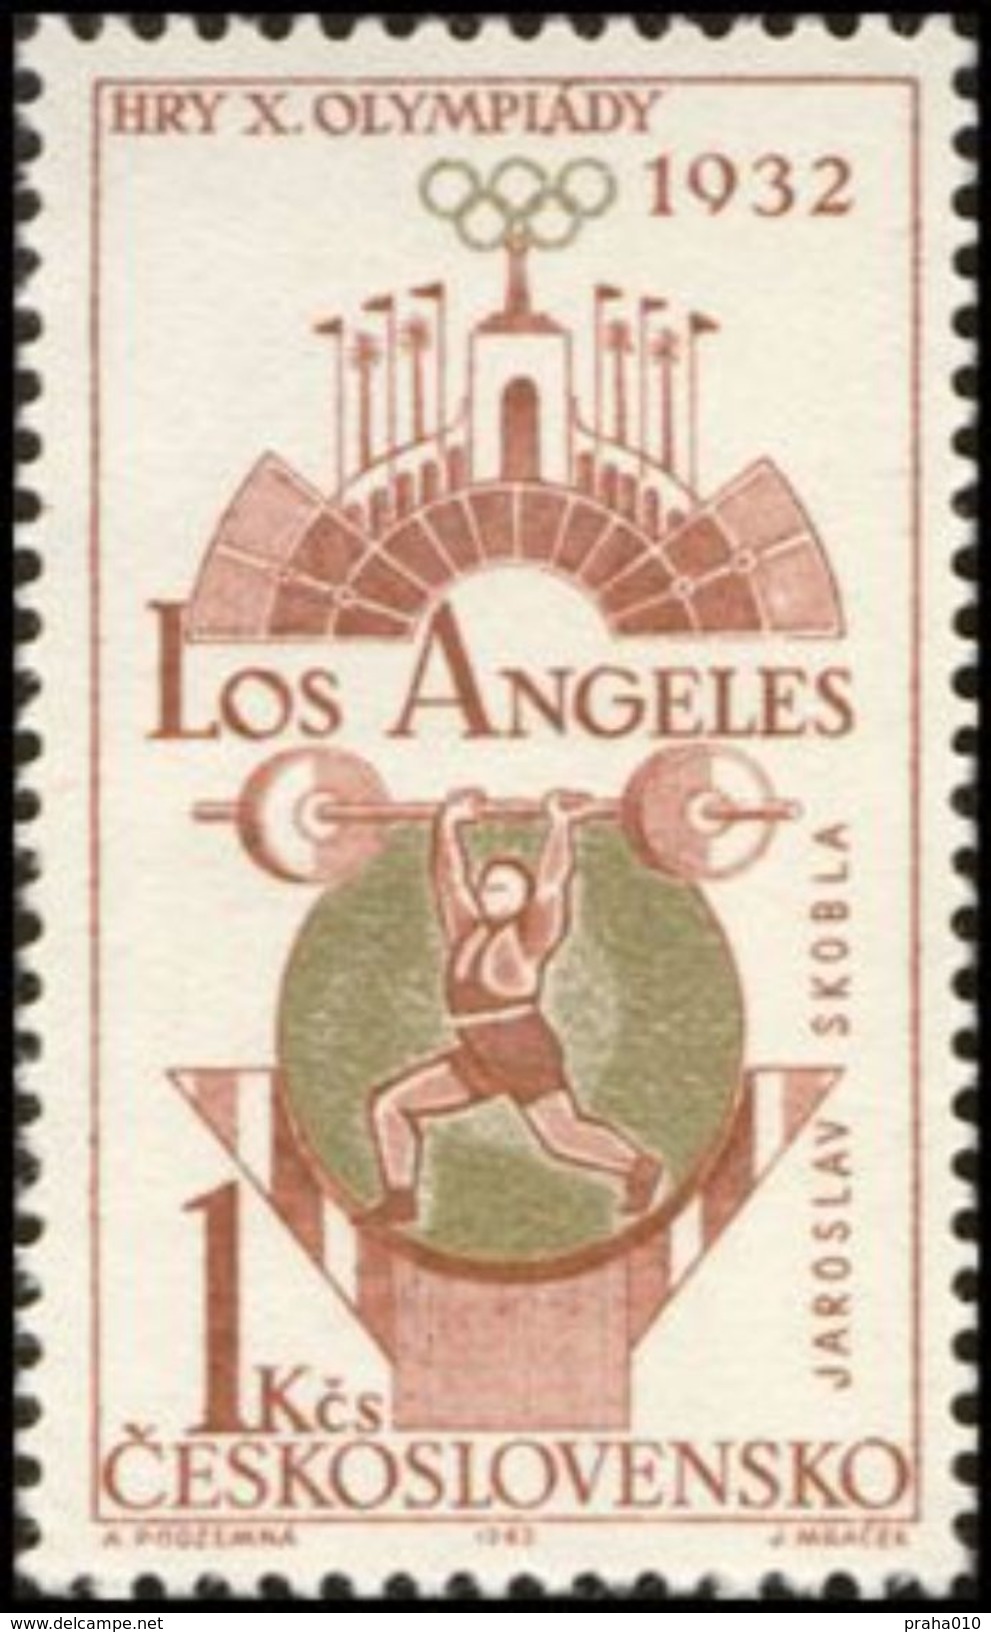 Czechoslovakia / Stamps (1965) 1431: Olympic Games 1932 Los Angeles, J. Skobla (weight-lifting); Painter: A. Podzemna - Estate 1932: Los Angeles